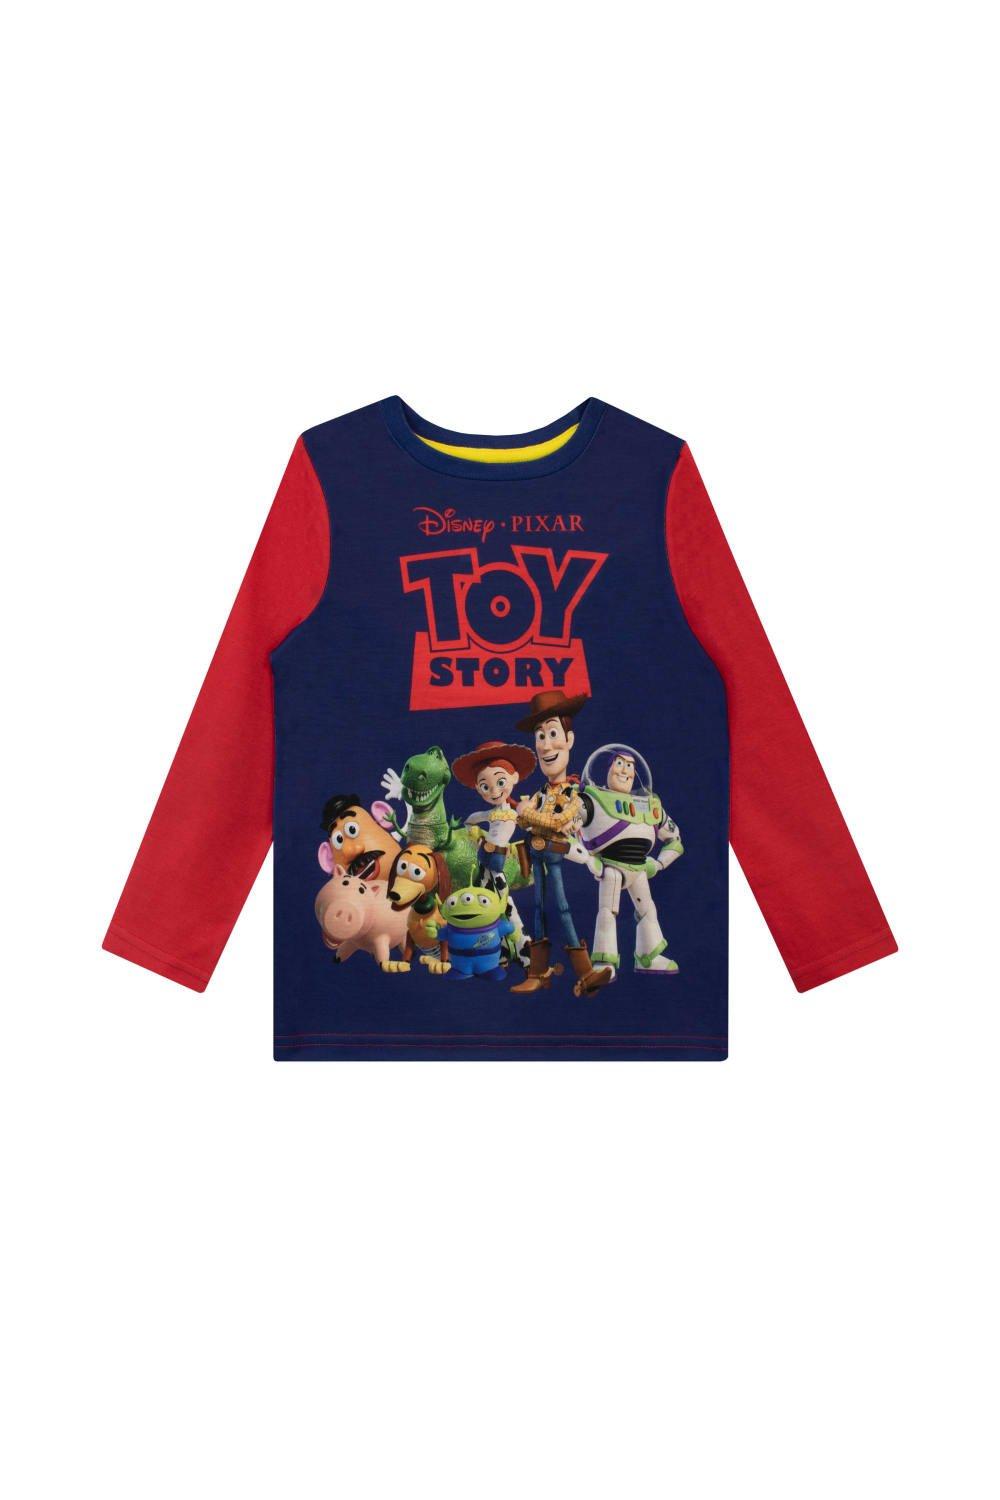 Toy Story Woody Buzz and Bullseye Long Sleeve Top